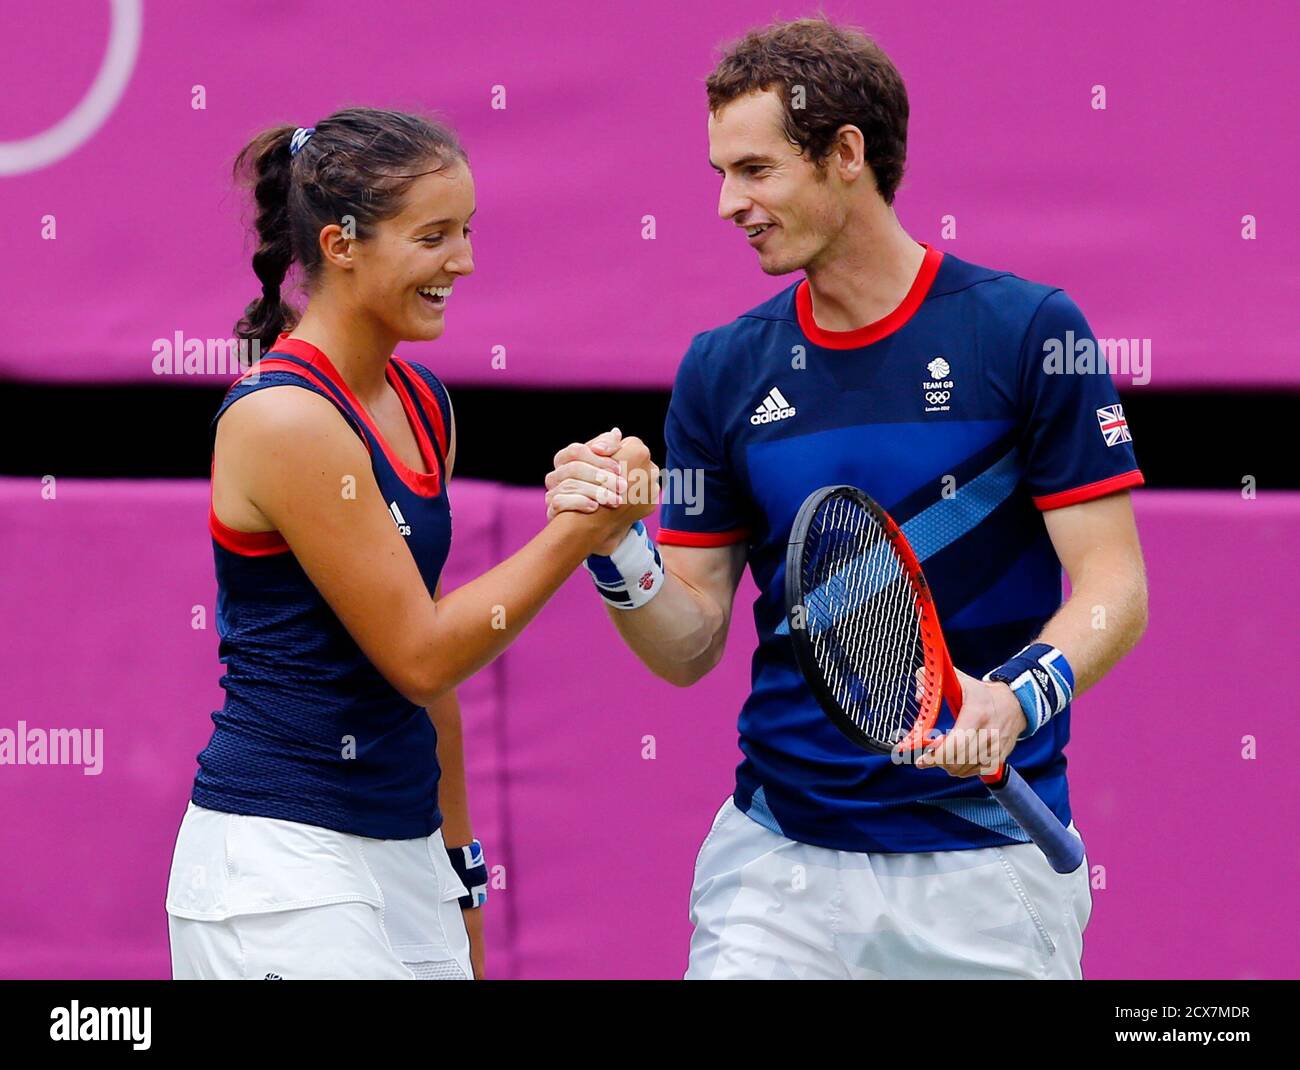 Britain's Laura Robson and Andy Murray celebrate winning their mixed  doubles tennis quarterfinal match against Australia's Samantha Stosur and  Lleyton Hewitt at the All England Lawn Tennis Club during the London 2012